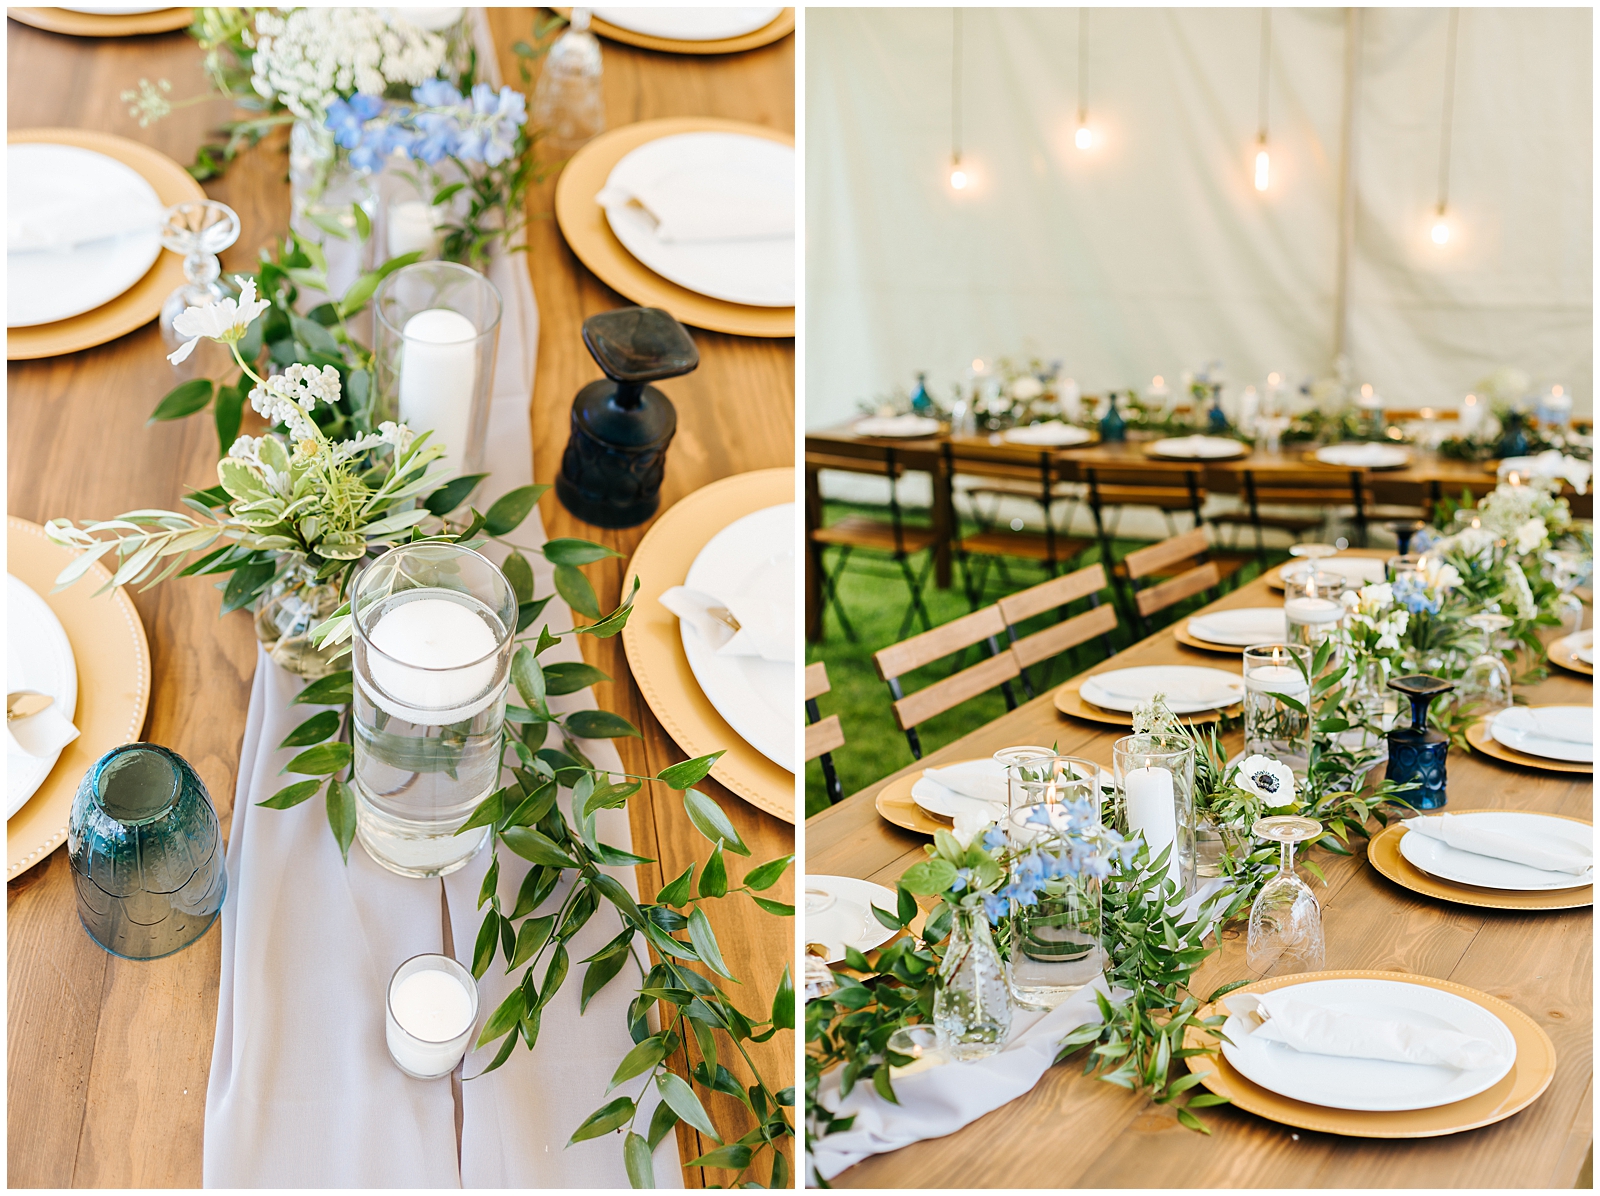 Tented Backyard Wedding Dinner with Farm Tables, Bistro Chairs, and Greenery